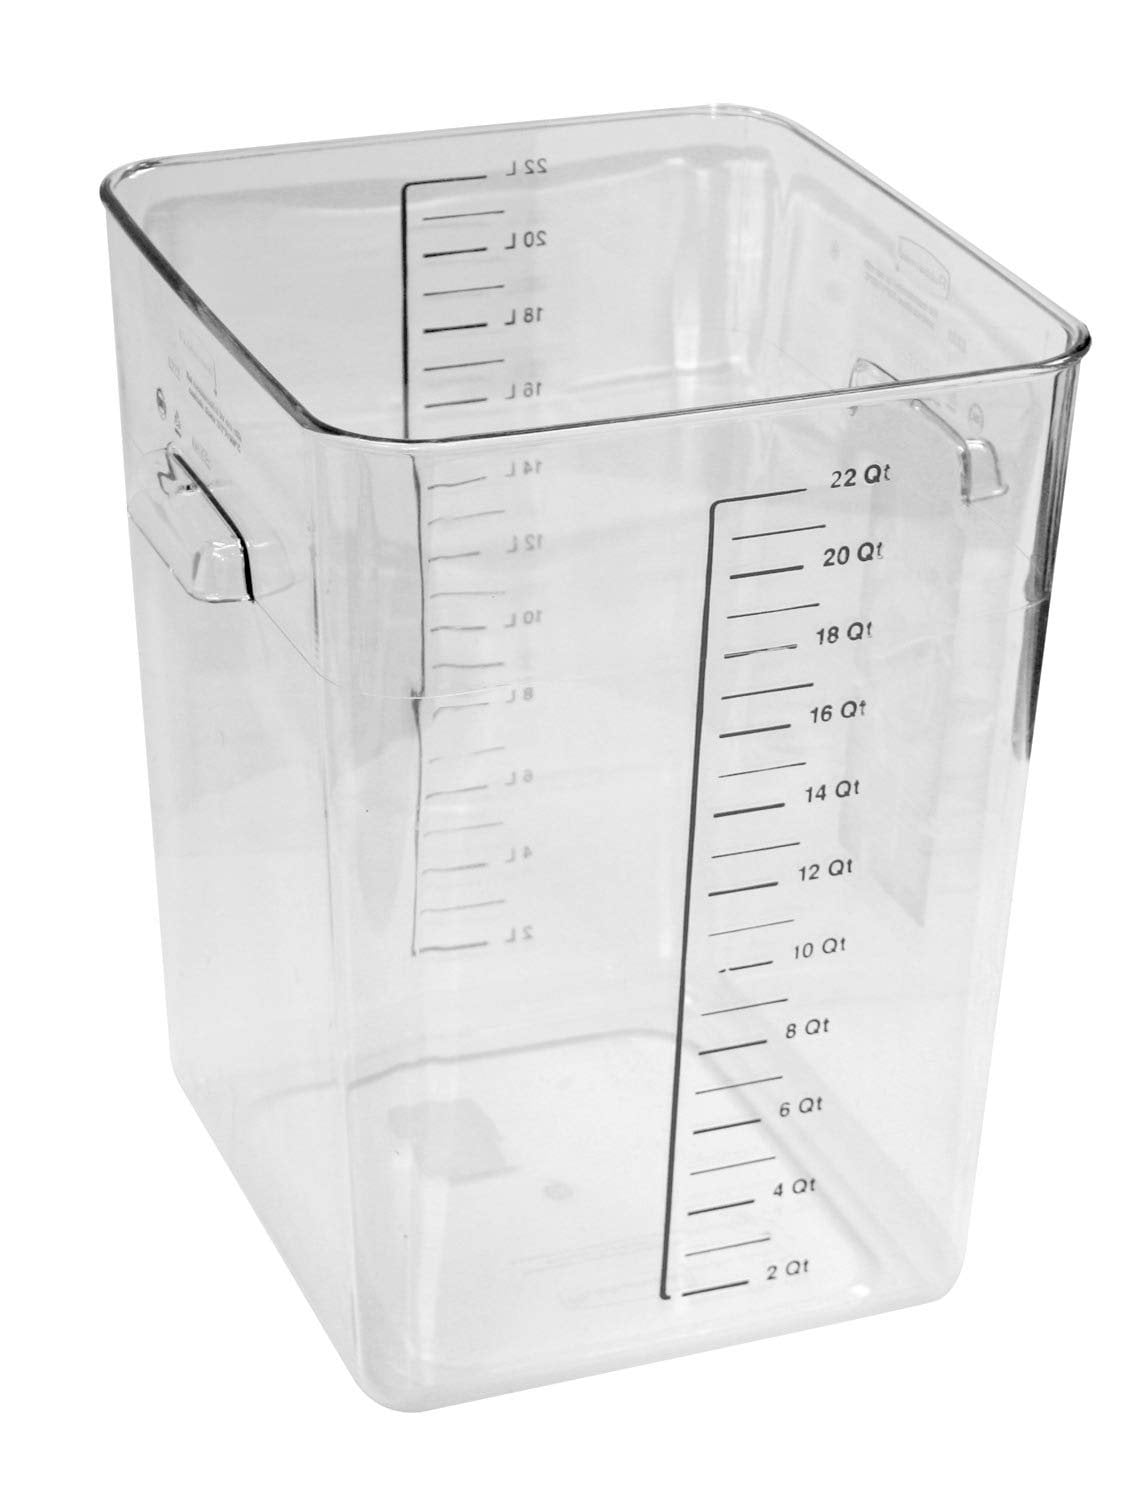 Rubbermaid FG630200CLR Food Storage Container, 2 QT, Square, Clear